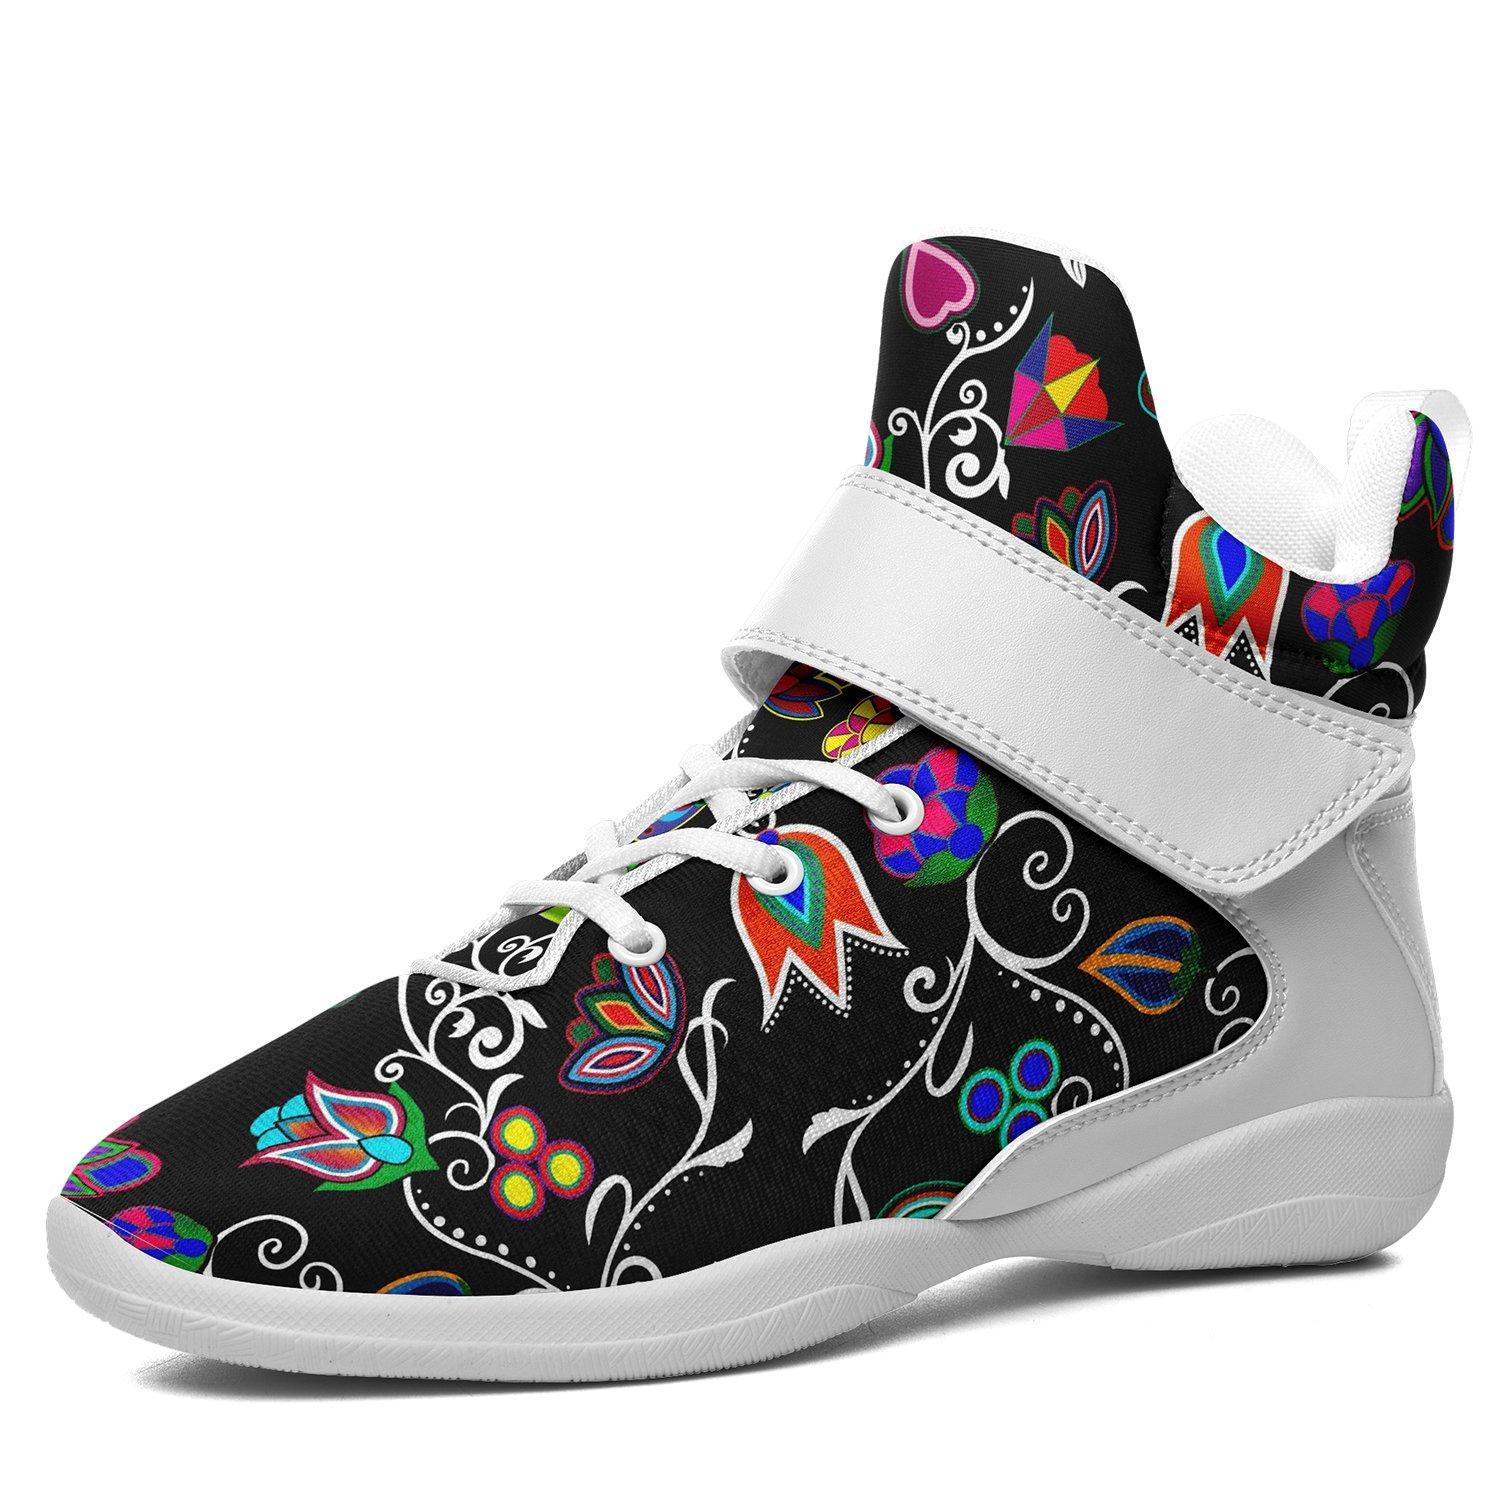 Indigenous Paisley Black Kid's Ipottaa Basketball / Sport High Top Shoes 49 Dzine US Child 12.5 / EUR 30 White Sole with White Strap 